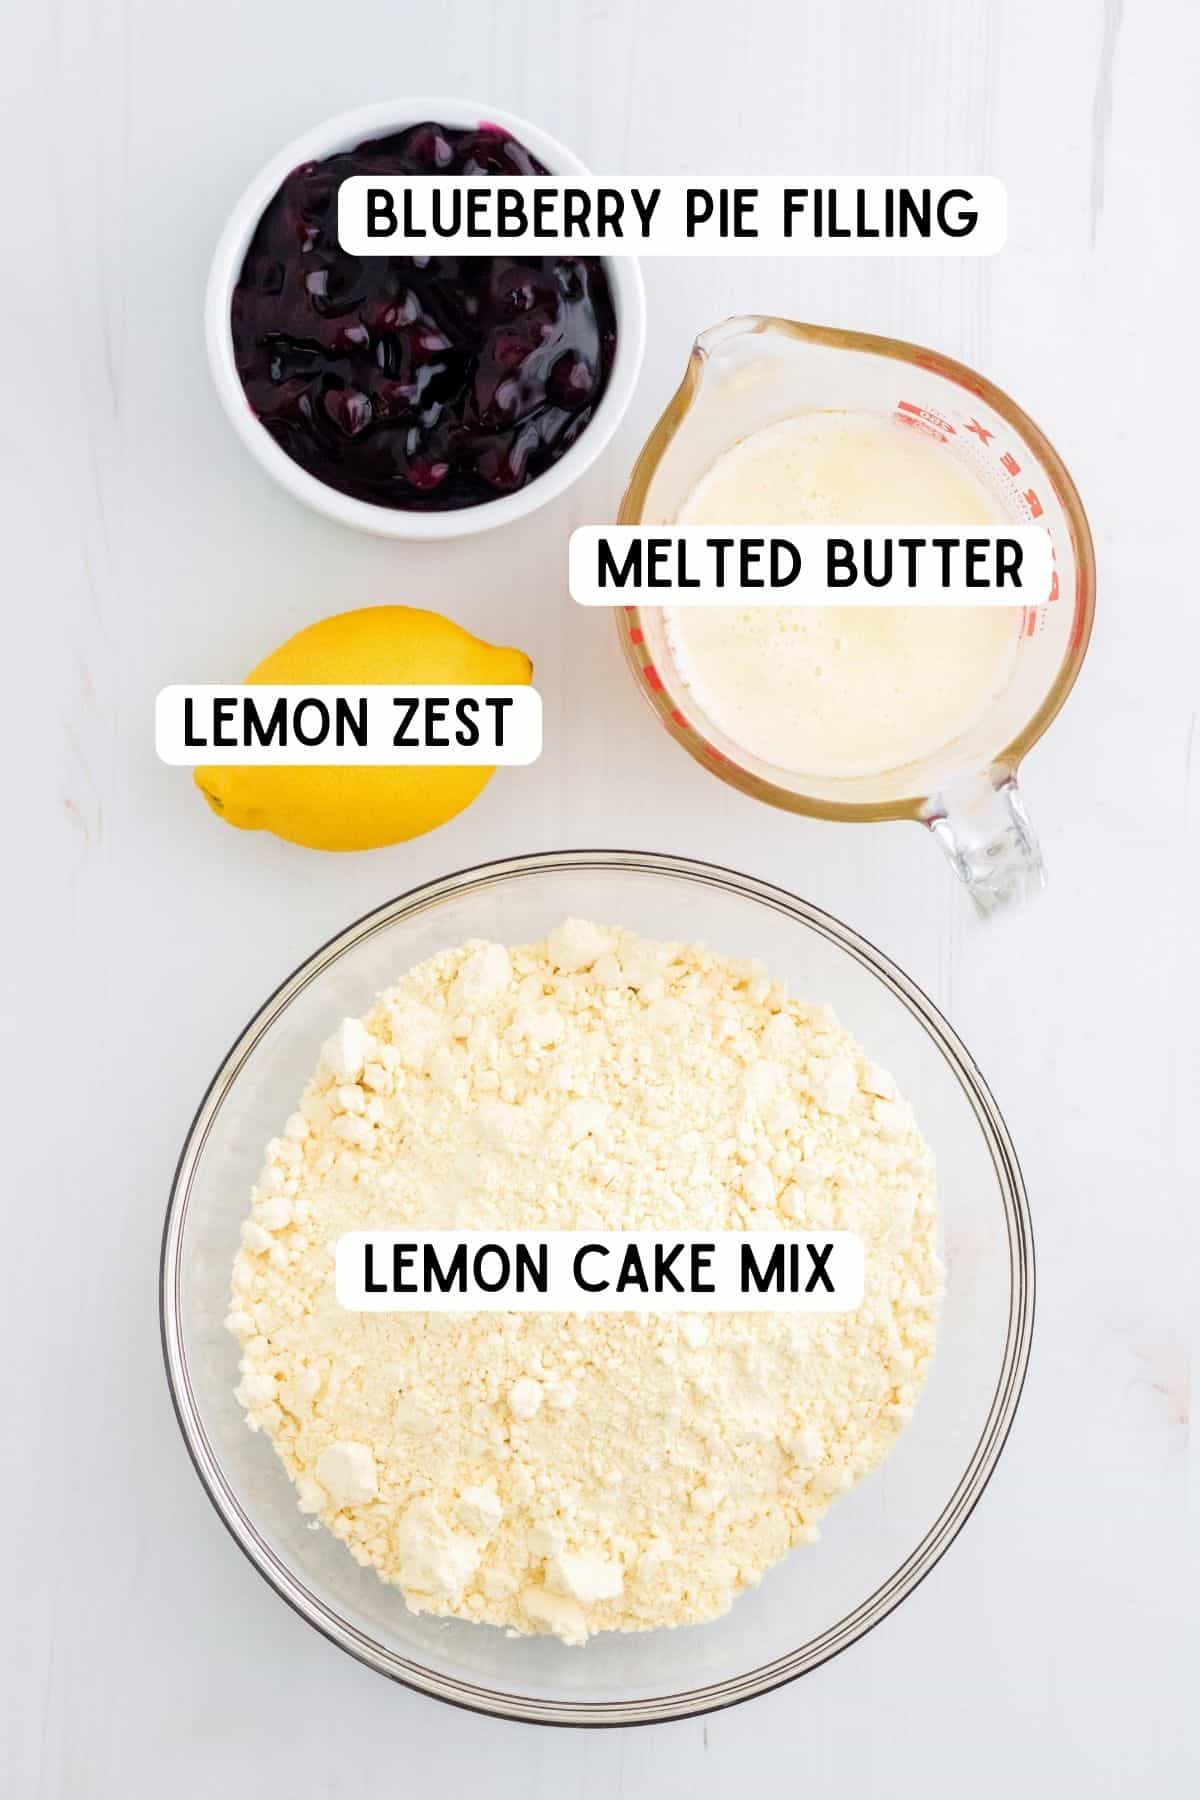 One lemon and bowls of blueberry pie filling, melted butter and lemon cake mix.